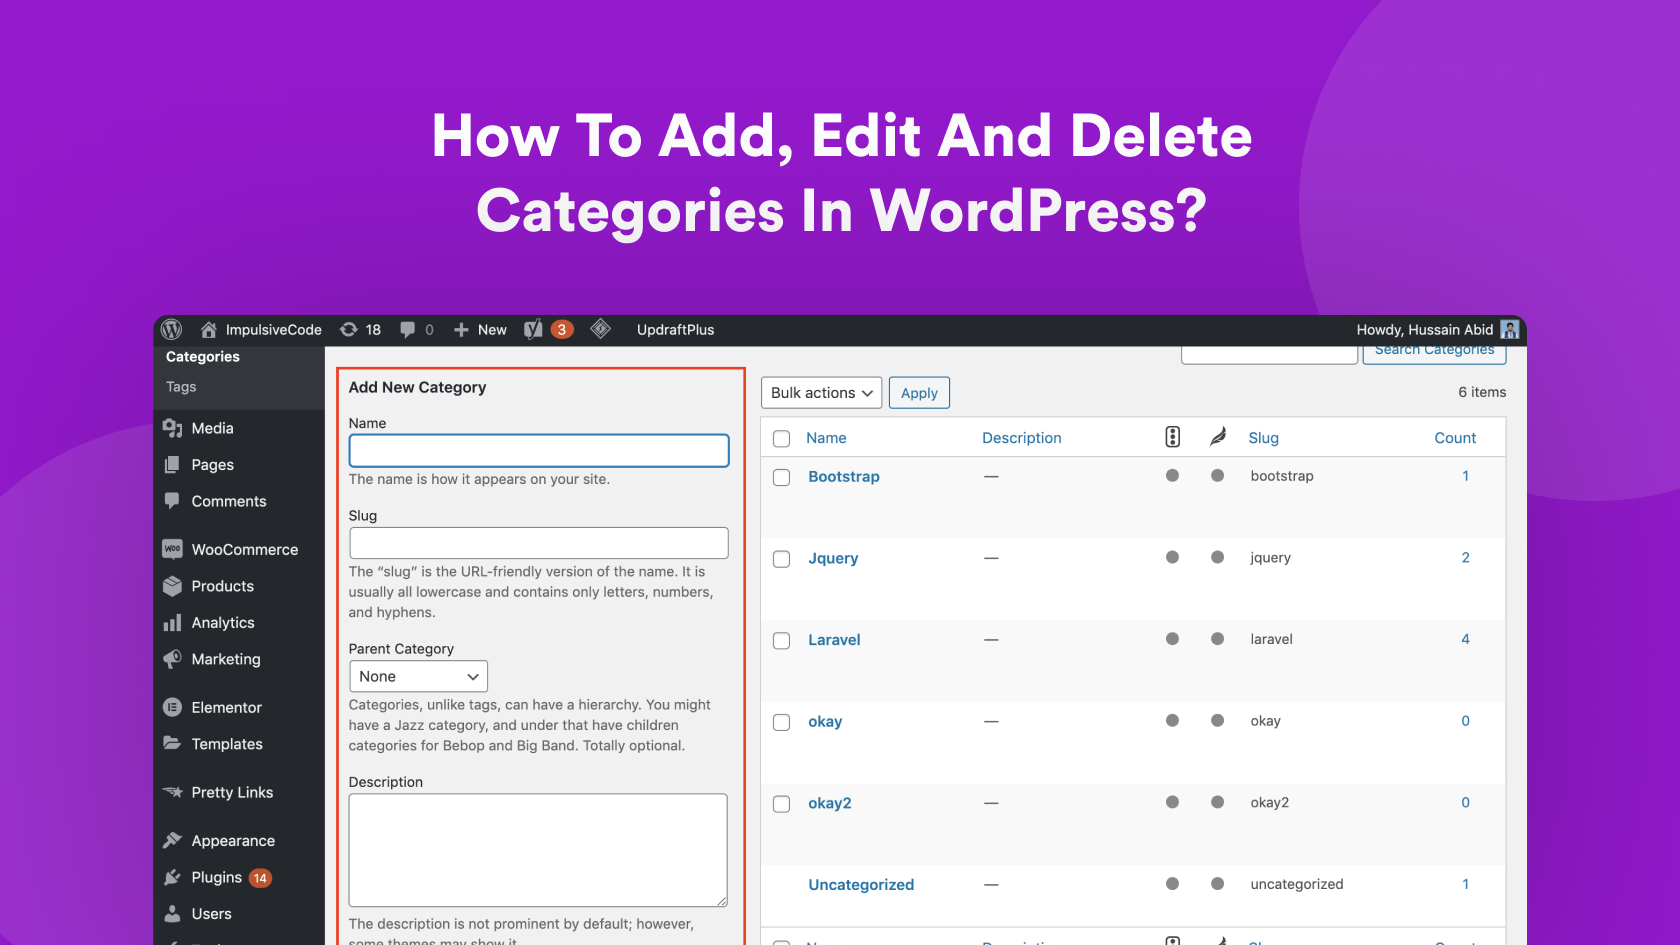 How To Add, Edit And Delete Categories In WordPress?